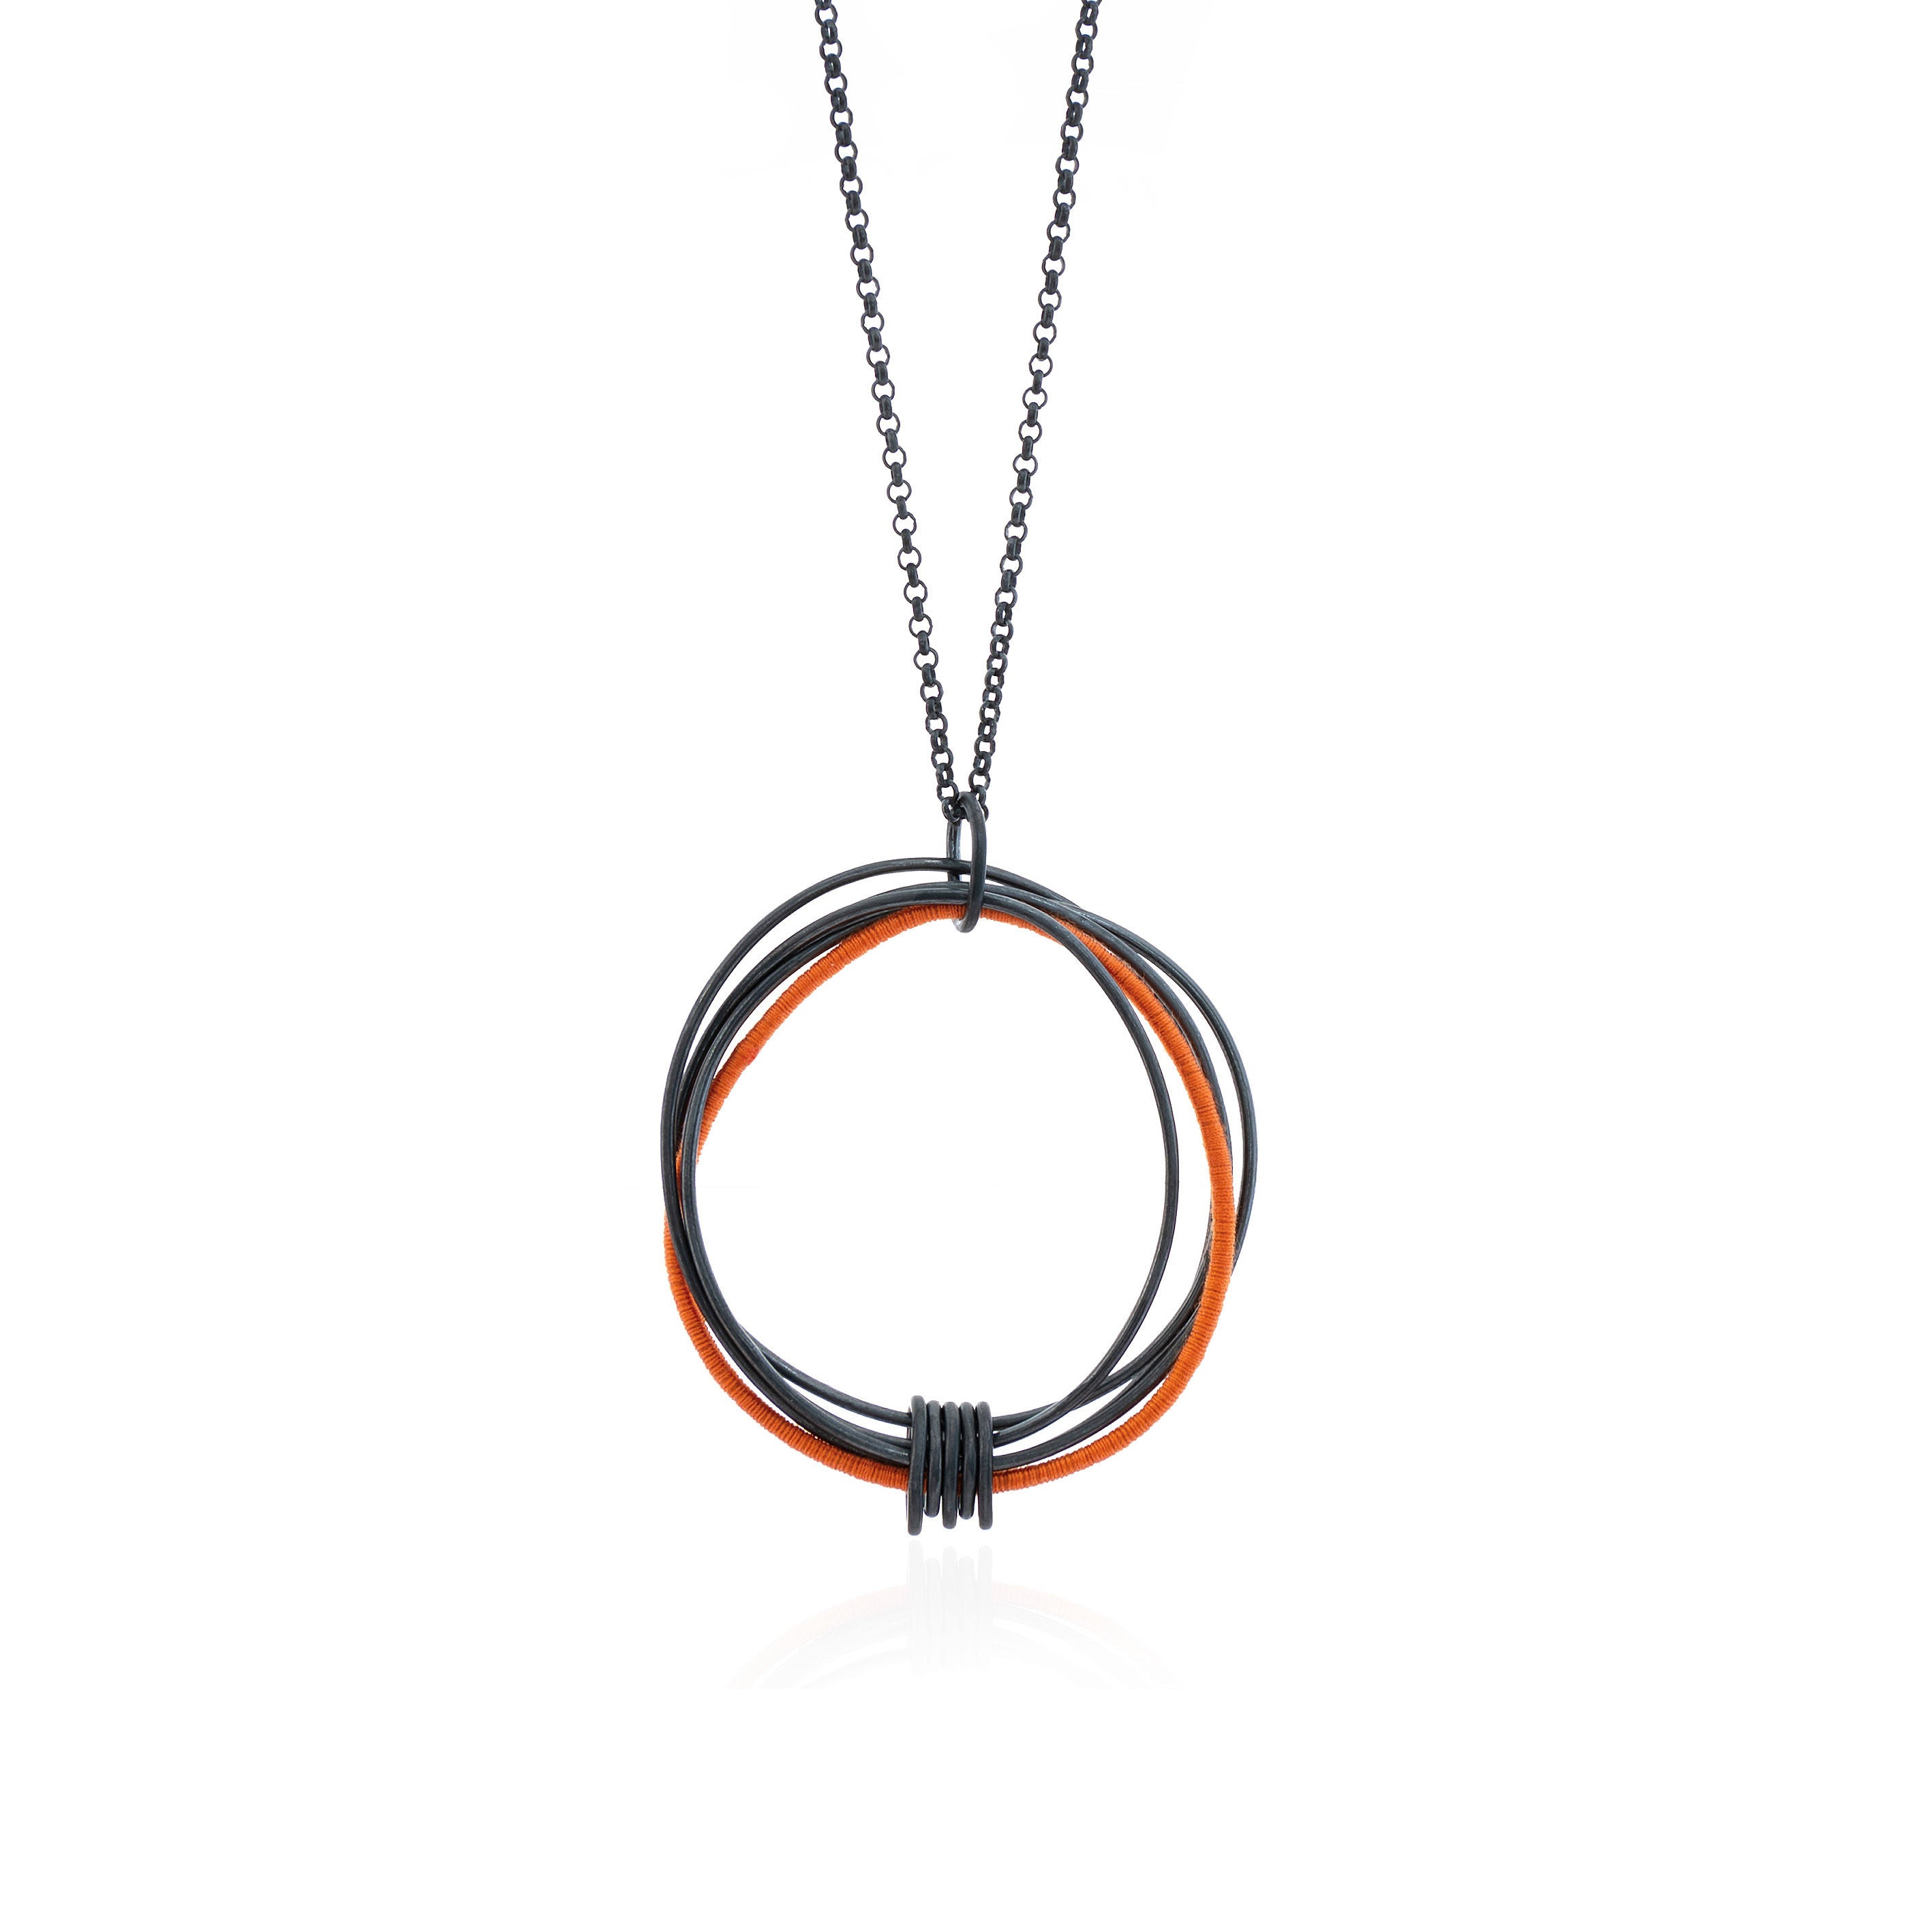 Wrapped Orange Oxidized Pendant on Chain (large) features five large oxidized wire circles of varying sizes that are linked together with five small oval links attached to the base of the pendant, with one large wire circle wrapped with orange cotton thread and suspended on an oxidized belcher style chain, handmade in Adelaide, South Australia by Melissa Gillespie Jewellery